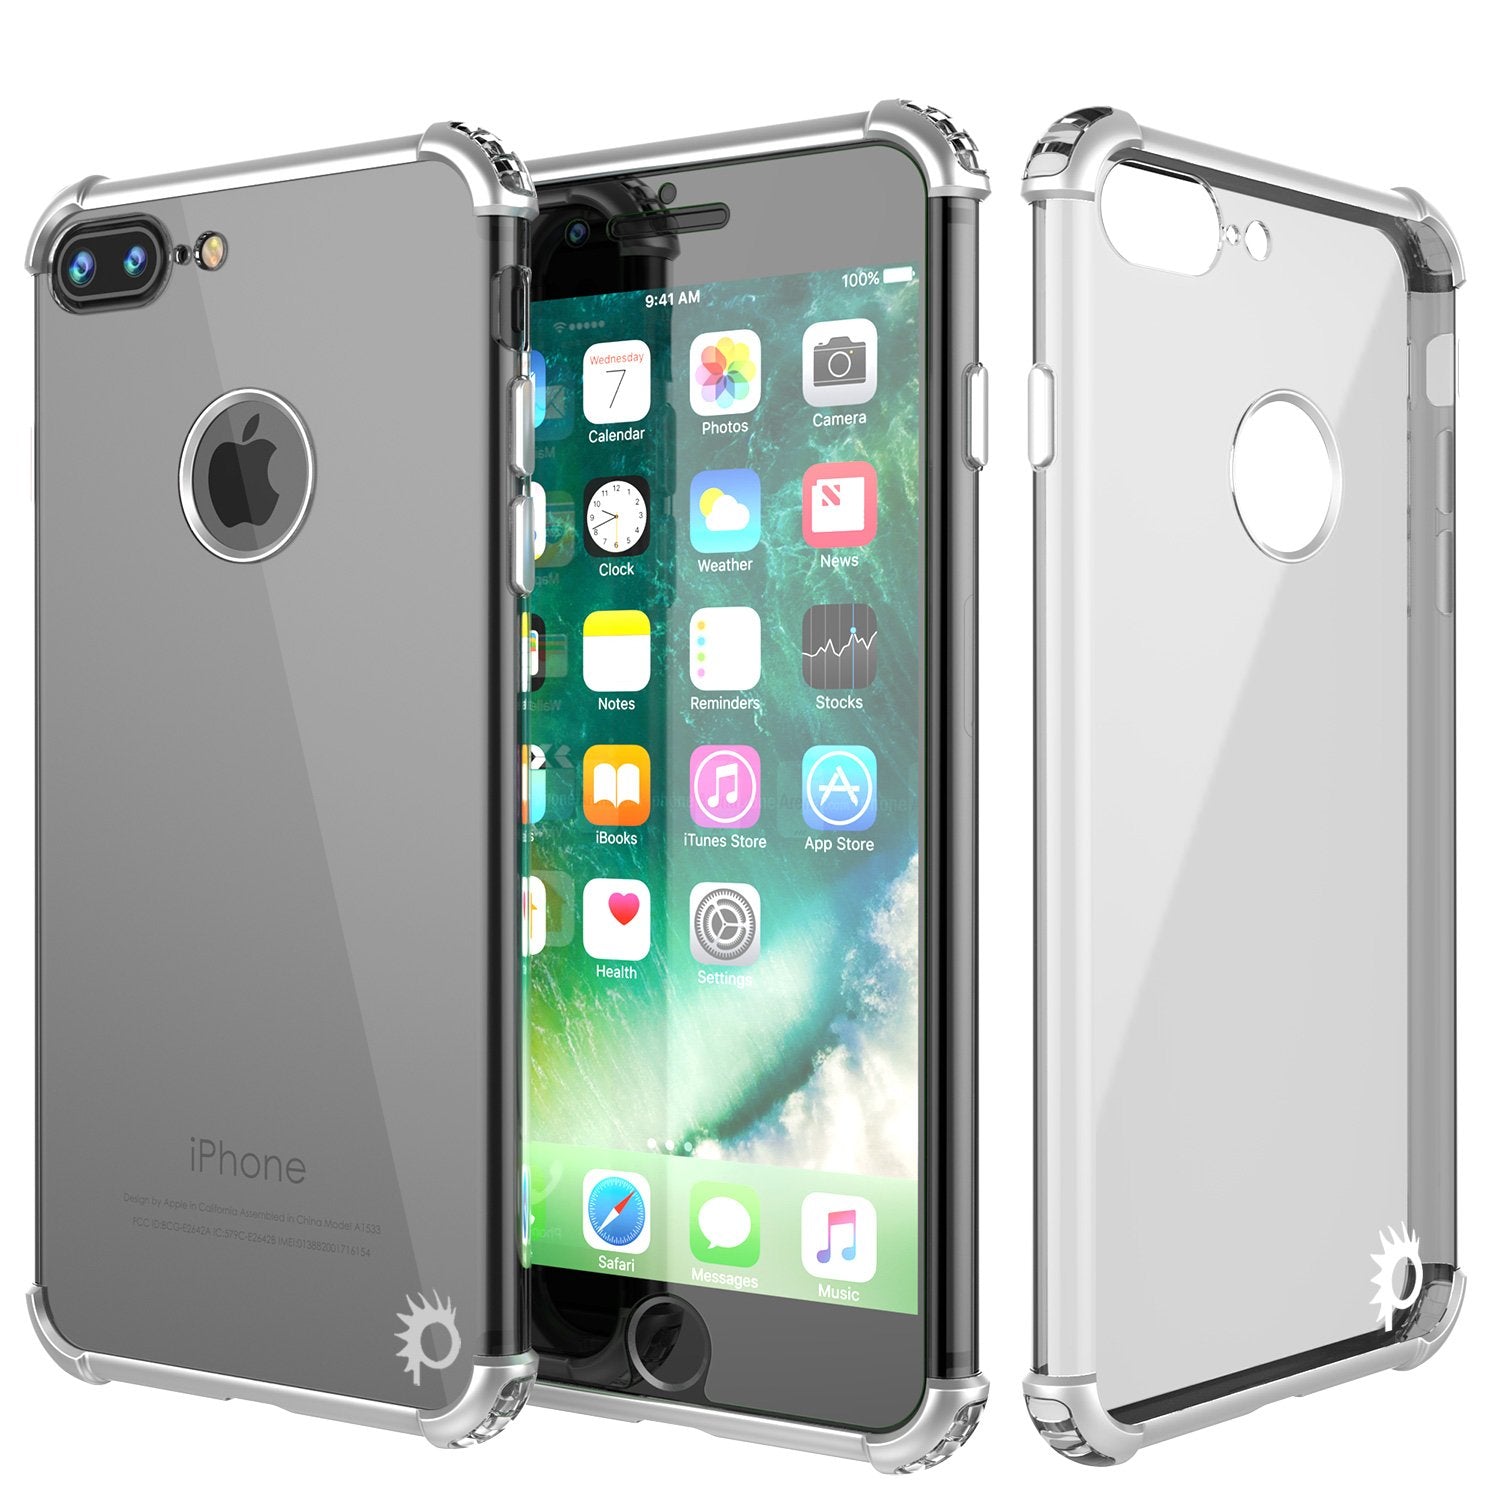 iPhone 8 PLUS Case, Punkcase [BLAZE SERIES] Protective Cover W/ PunkShield Screen Protector [Shockproof] [Slim Fit] for Apple iPhone 7/8/6/6s PLUS [Silver]